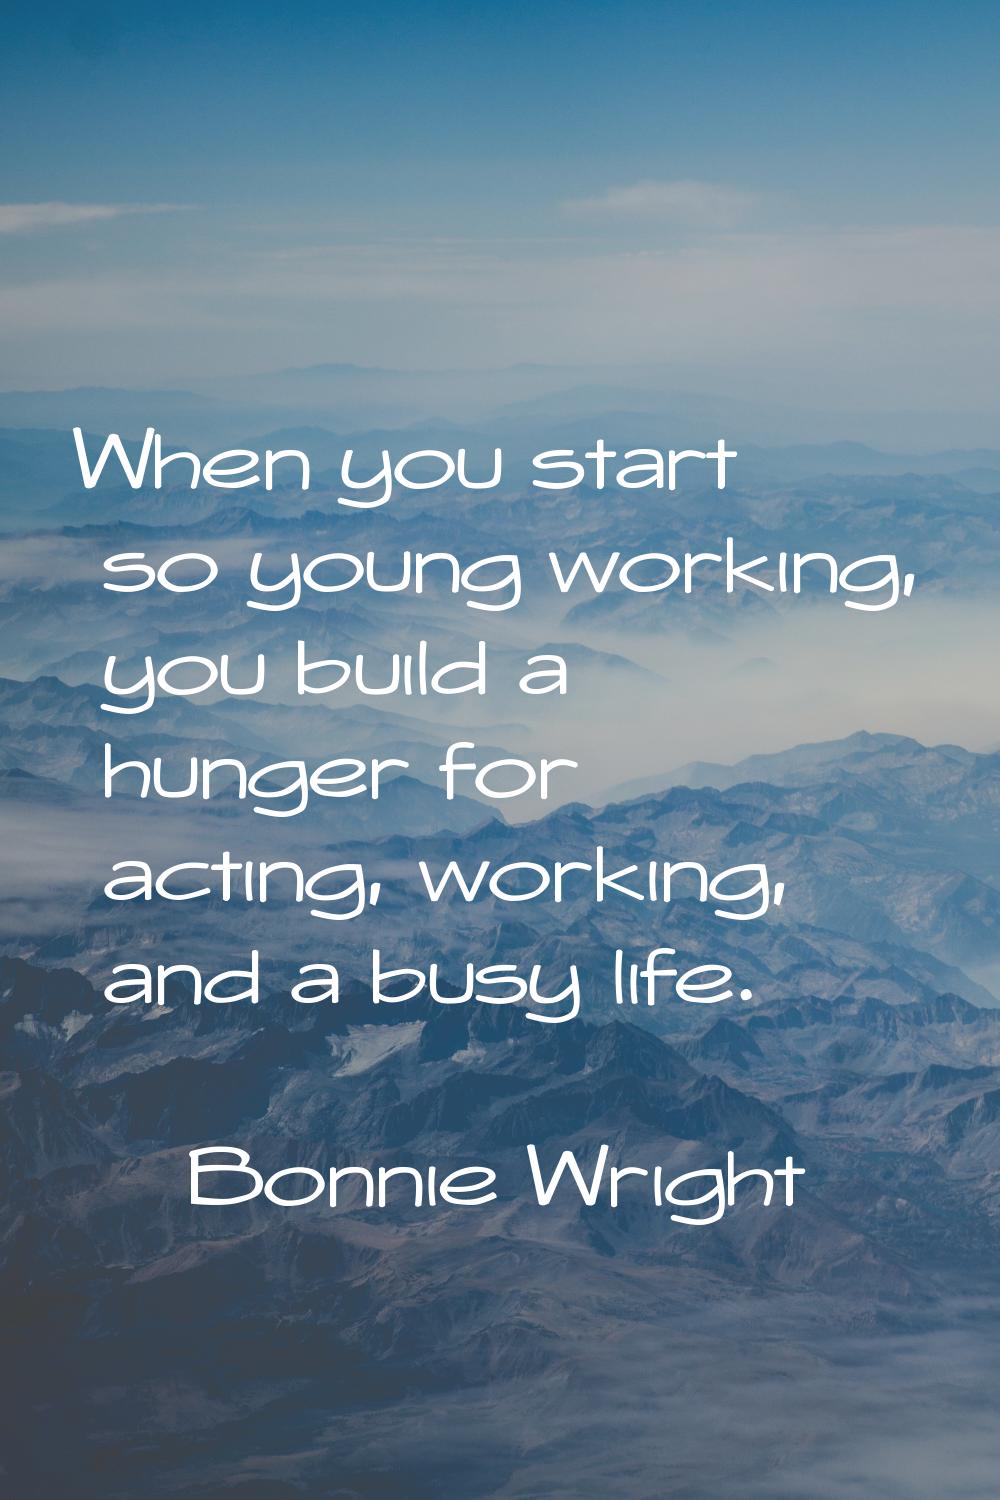 When you start so young working, you build a hunger for acting, working, and a busy life.